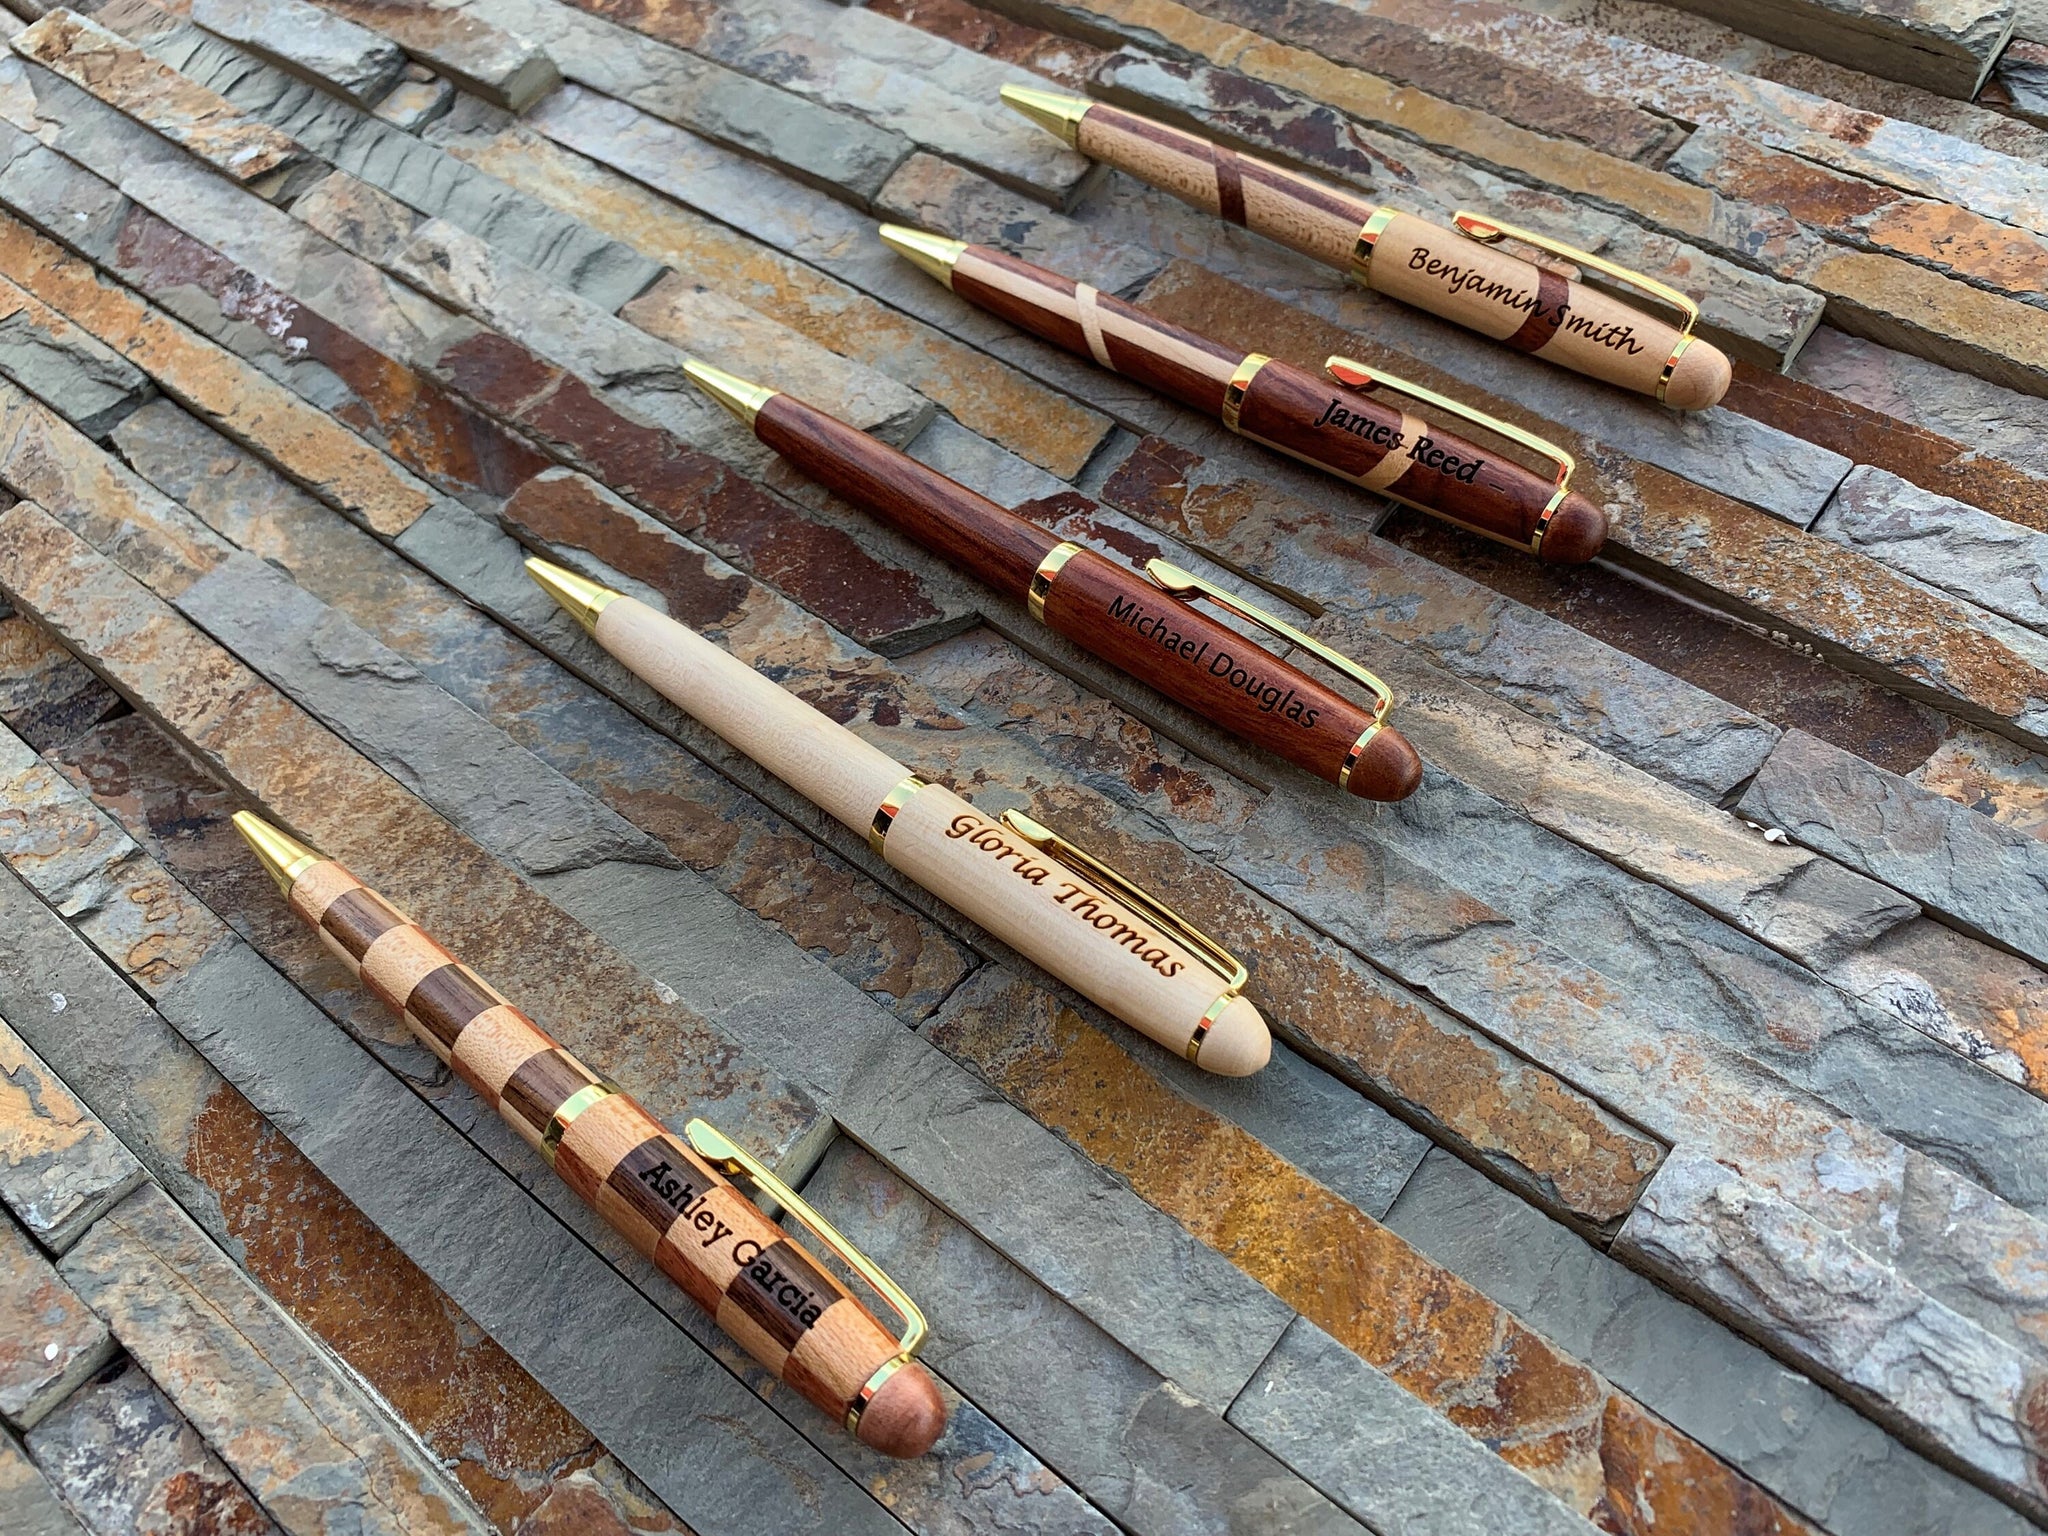 Executive Wooden Personalized Pen